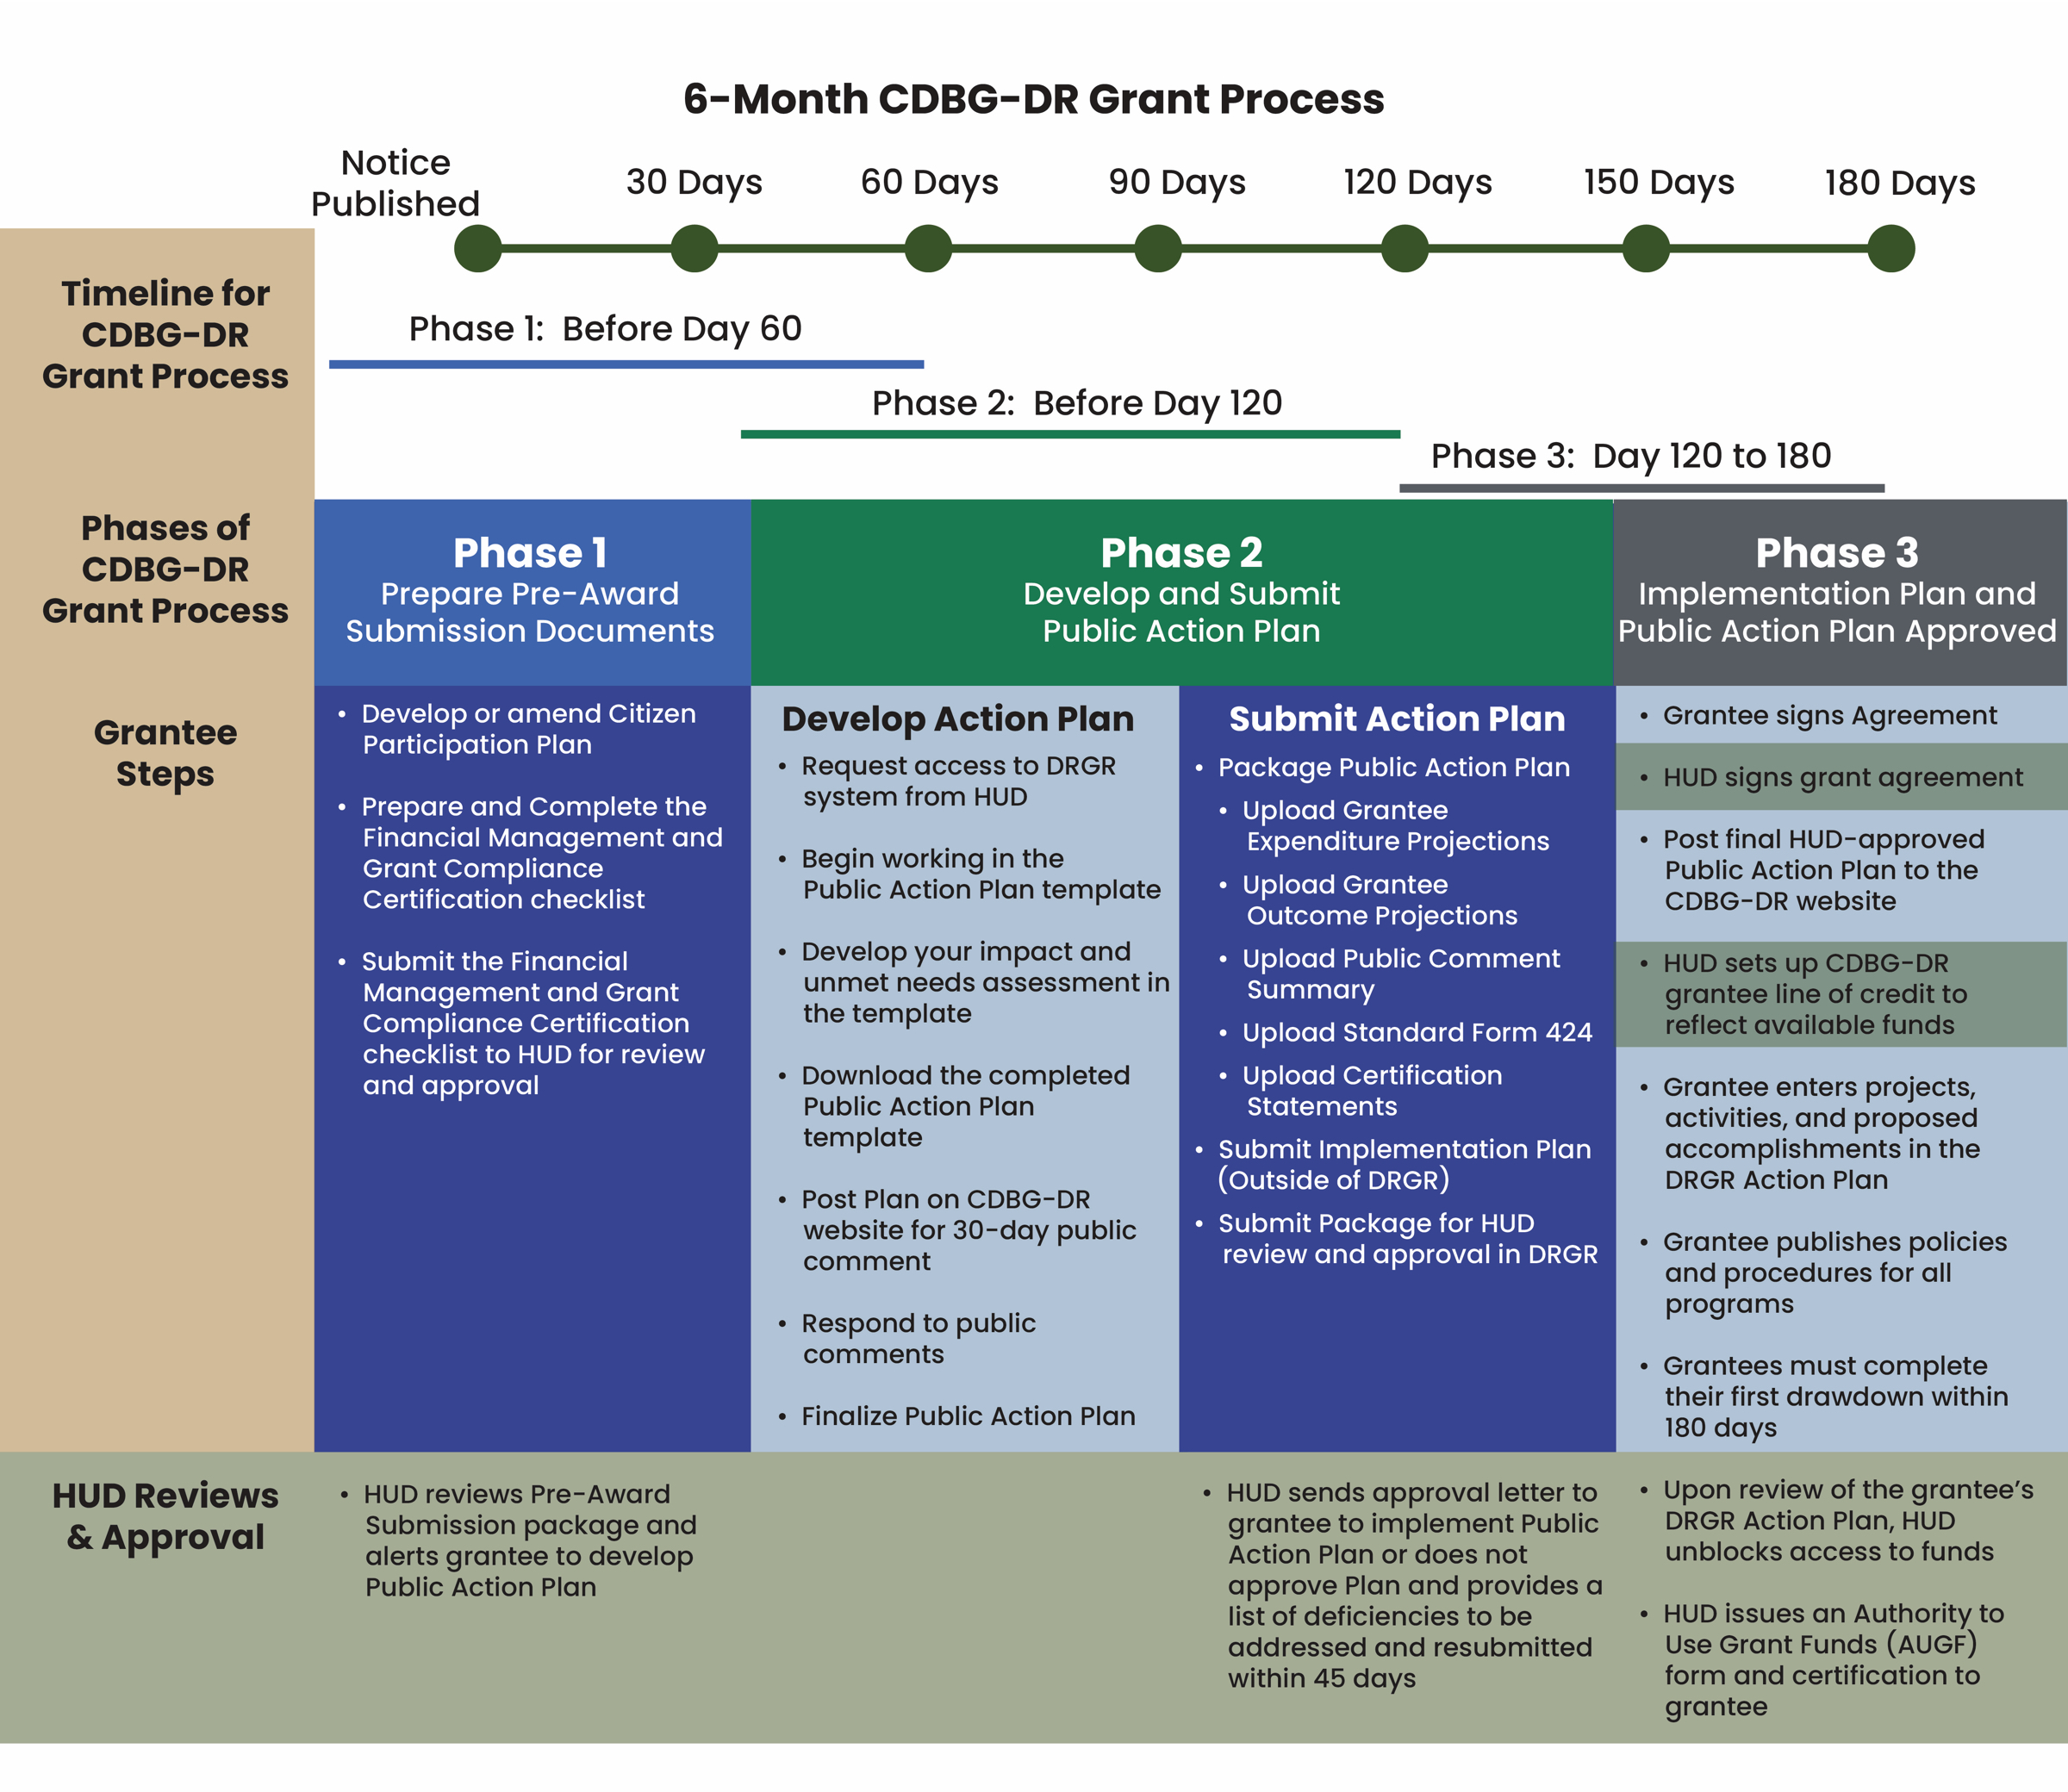 Graphic illustrating the 6-month CDBG-DR grant process timeline and phases with steps that HUD and grantees must complete before a grantee can begin expending CDBG-DR funds. When you click on the image, it will open a new window displaying accessibility text details. 